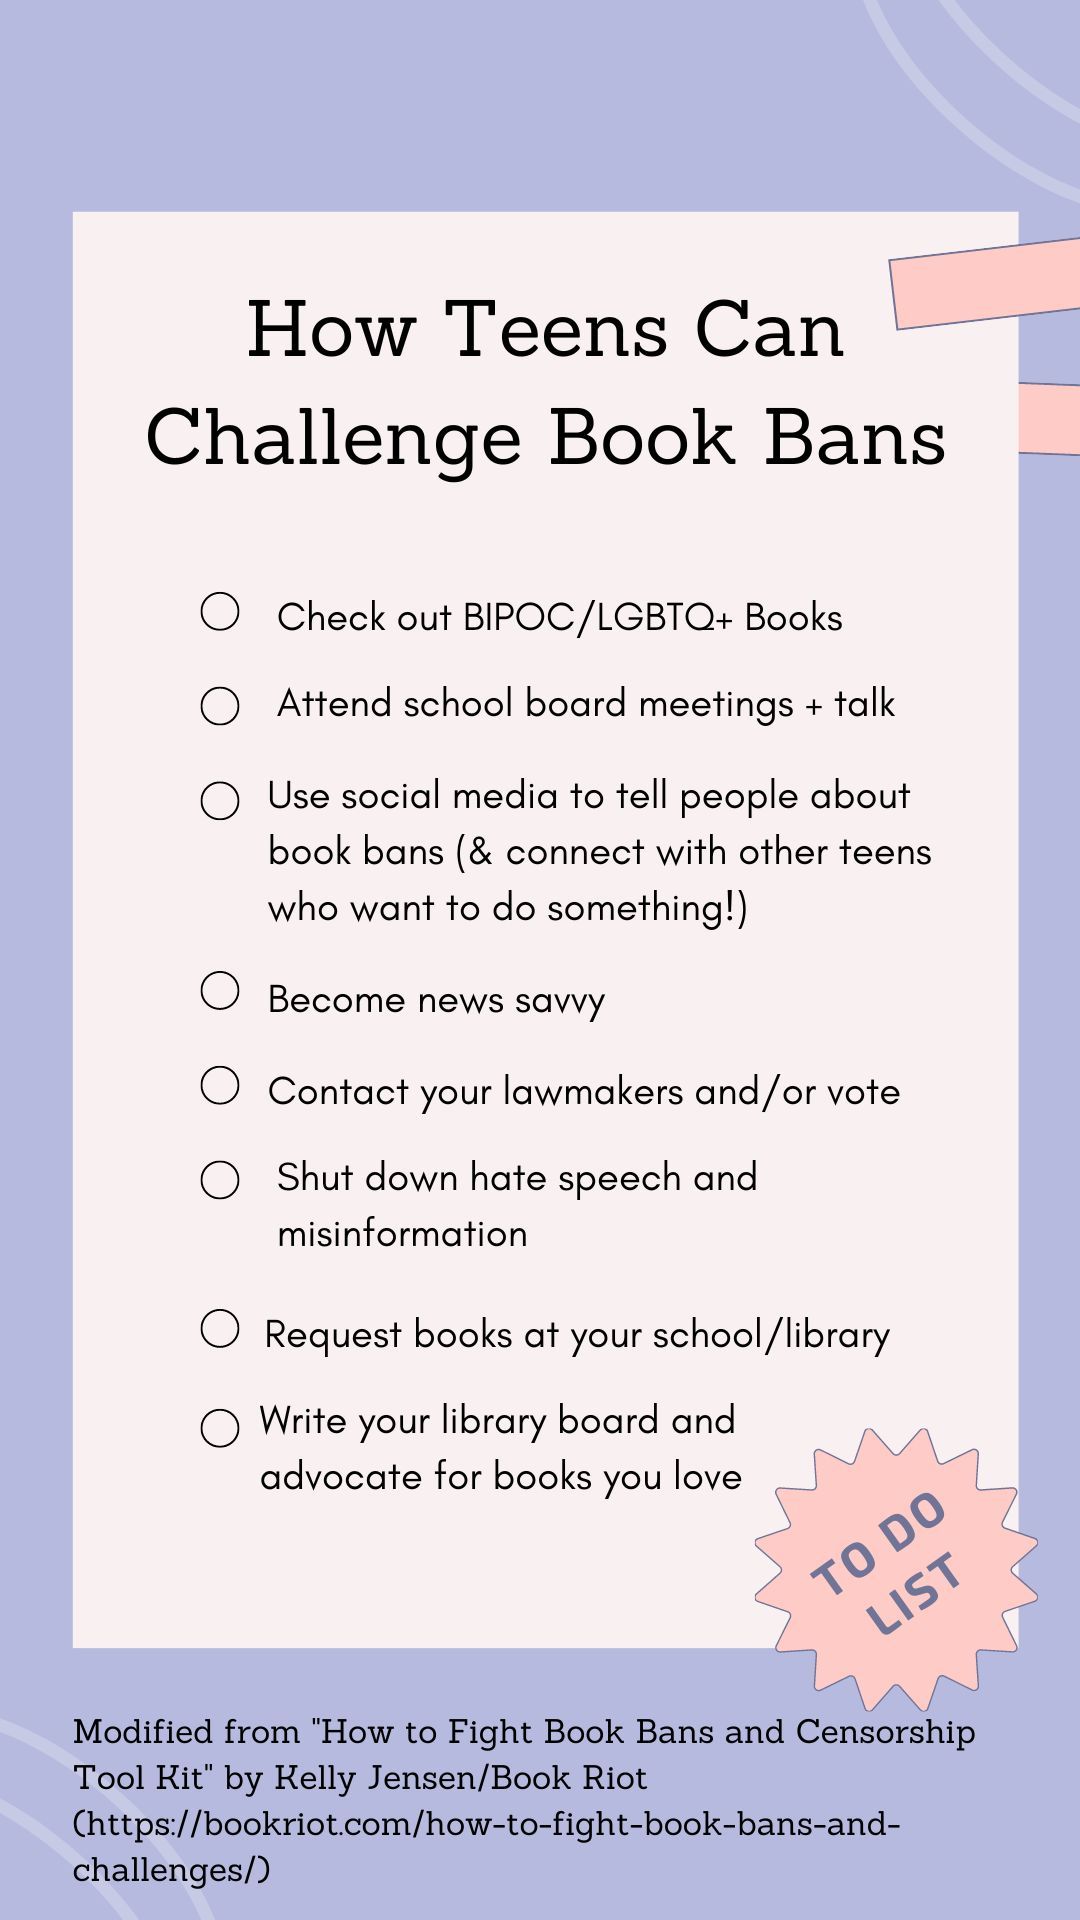 Graphic image of what teens can do to fight book bans.